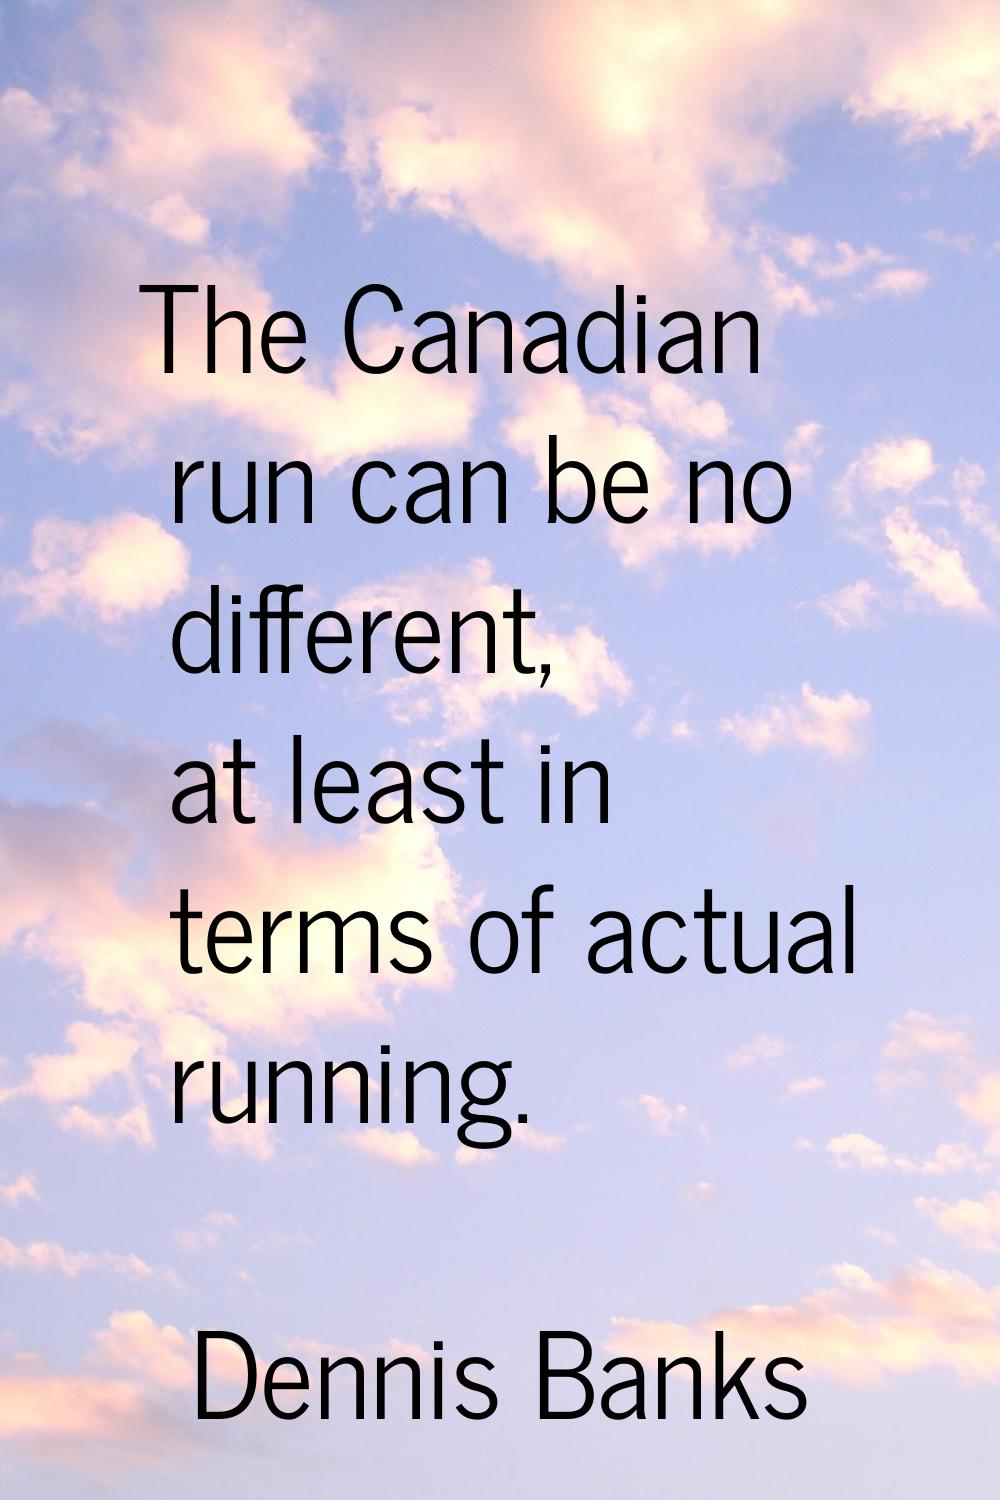 The Canadian run can be no different, at least in terms of actual running.